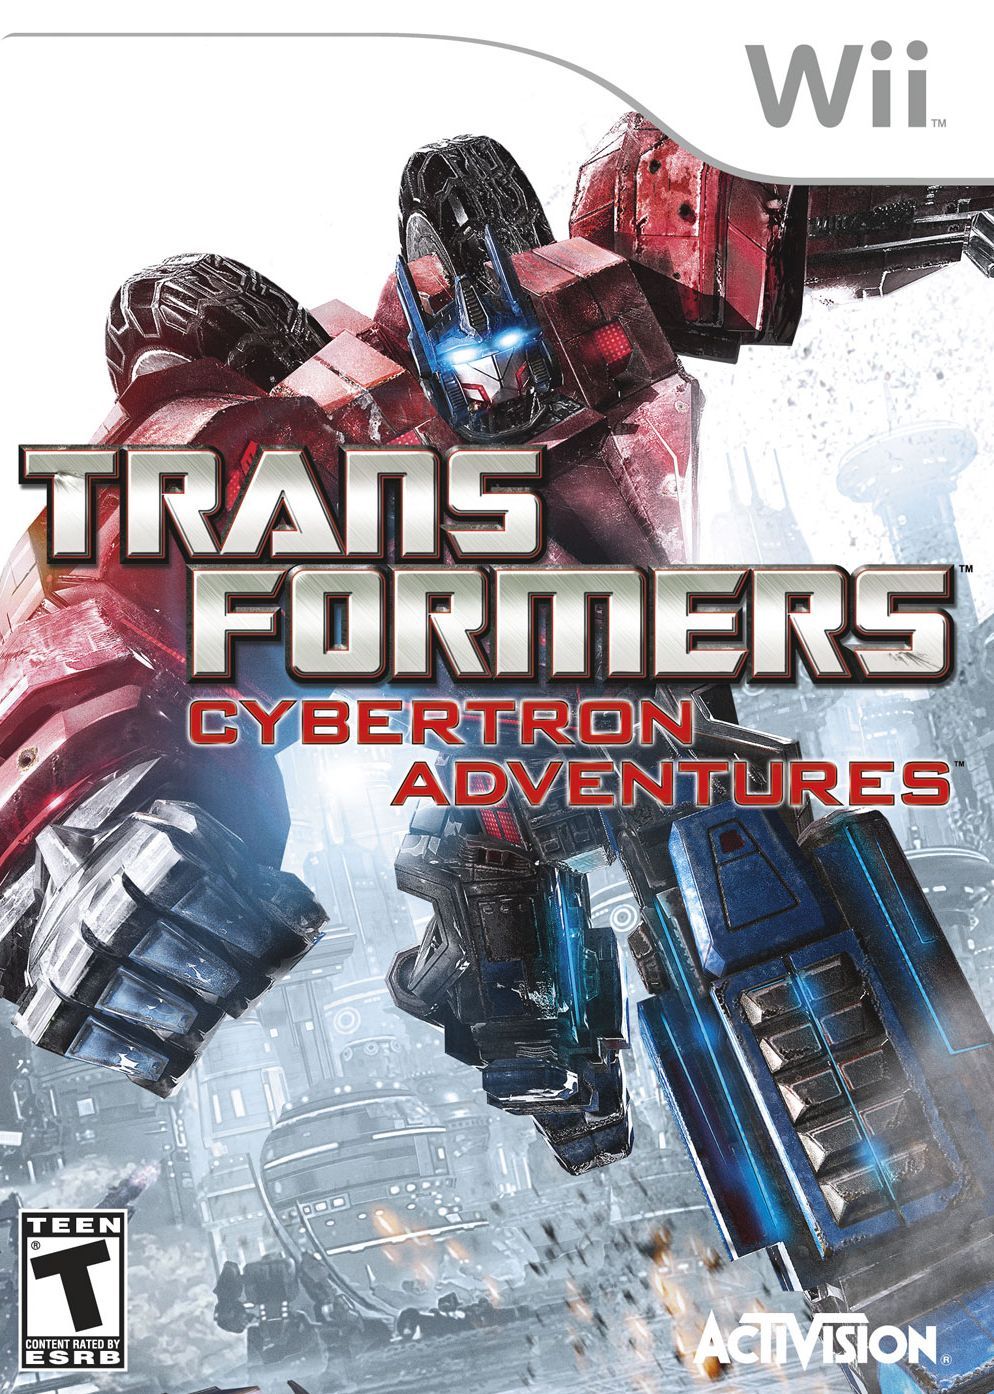 download transformers war for cybertron trilogy